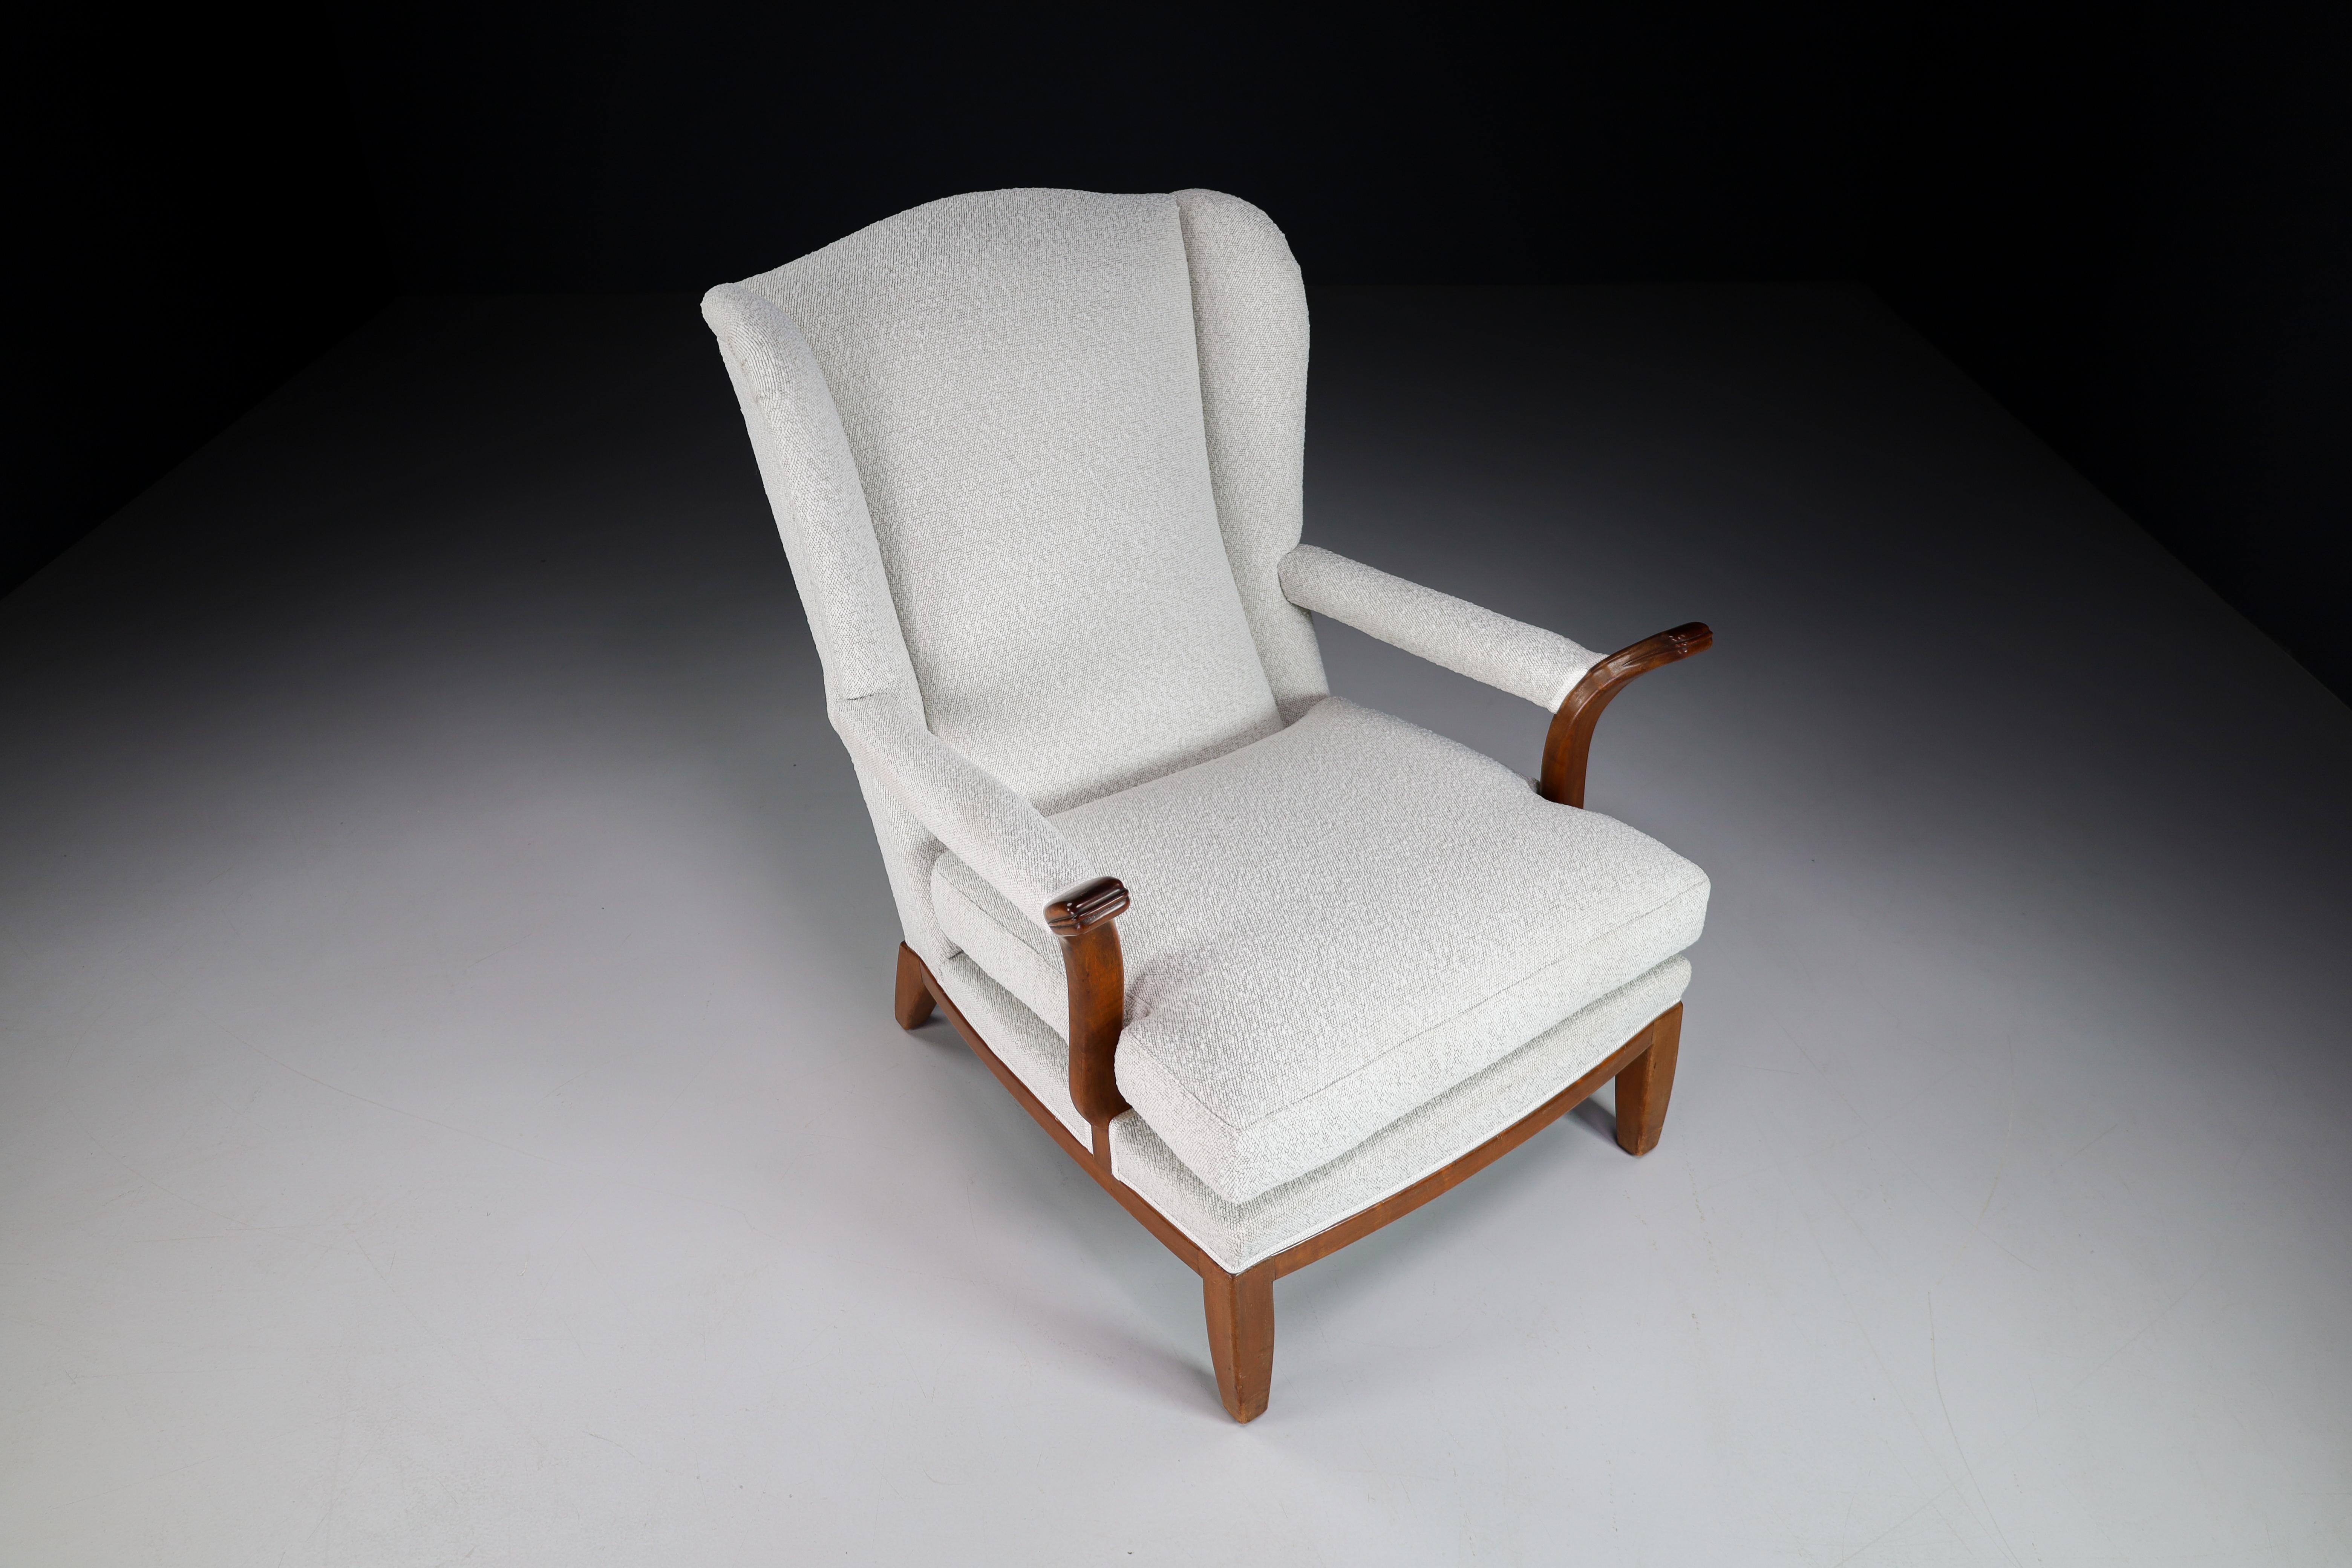 Large Wingback Chair in Walnut and New Bouclé Fabric, France, 1930s For Sale 2